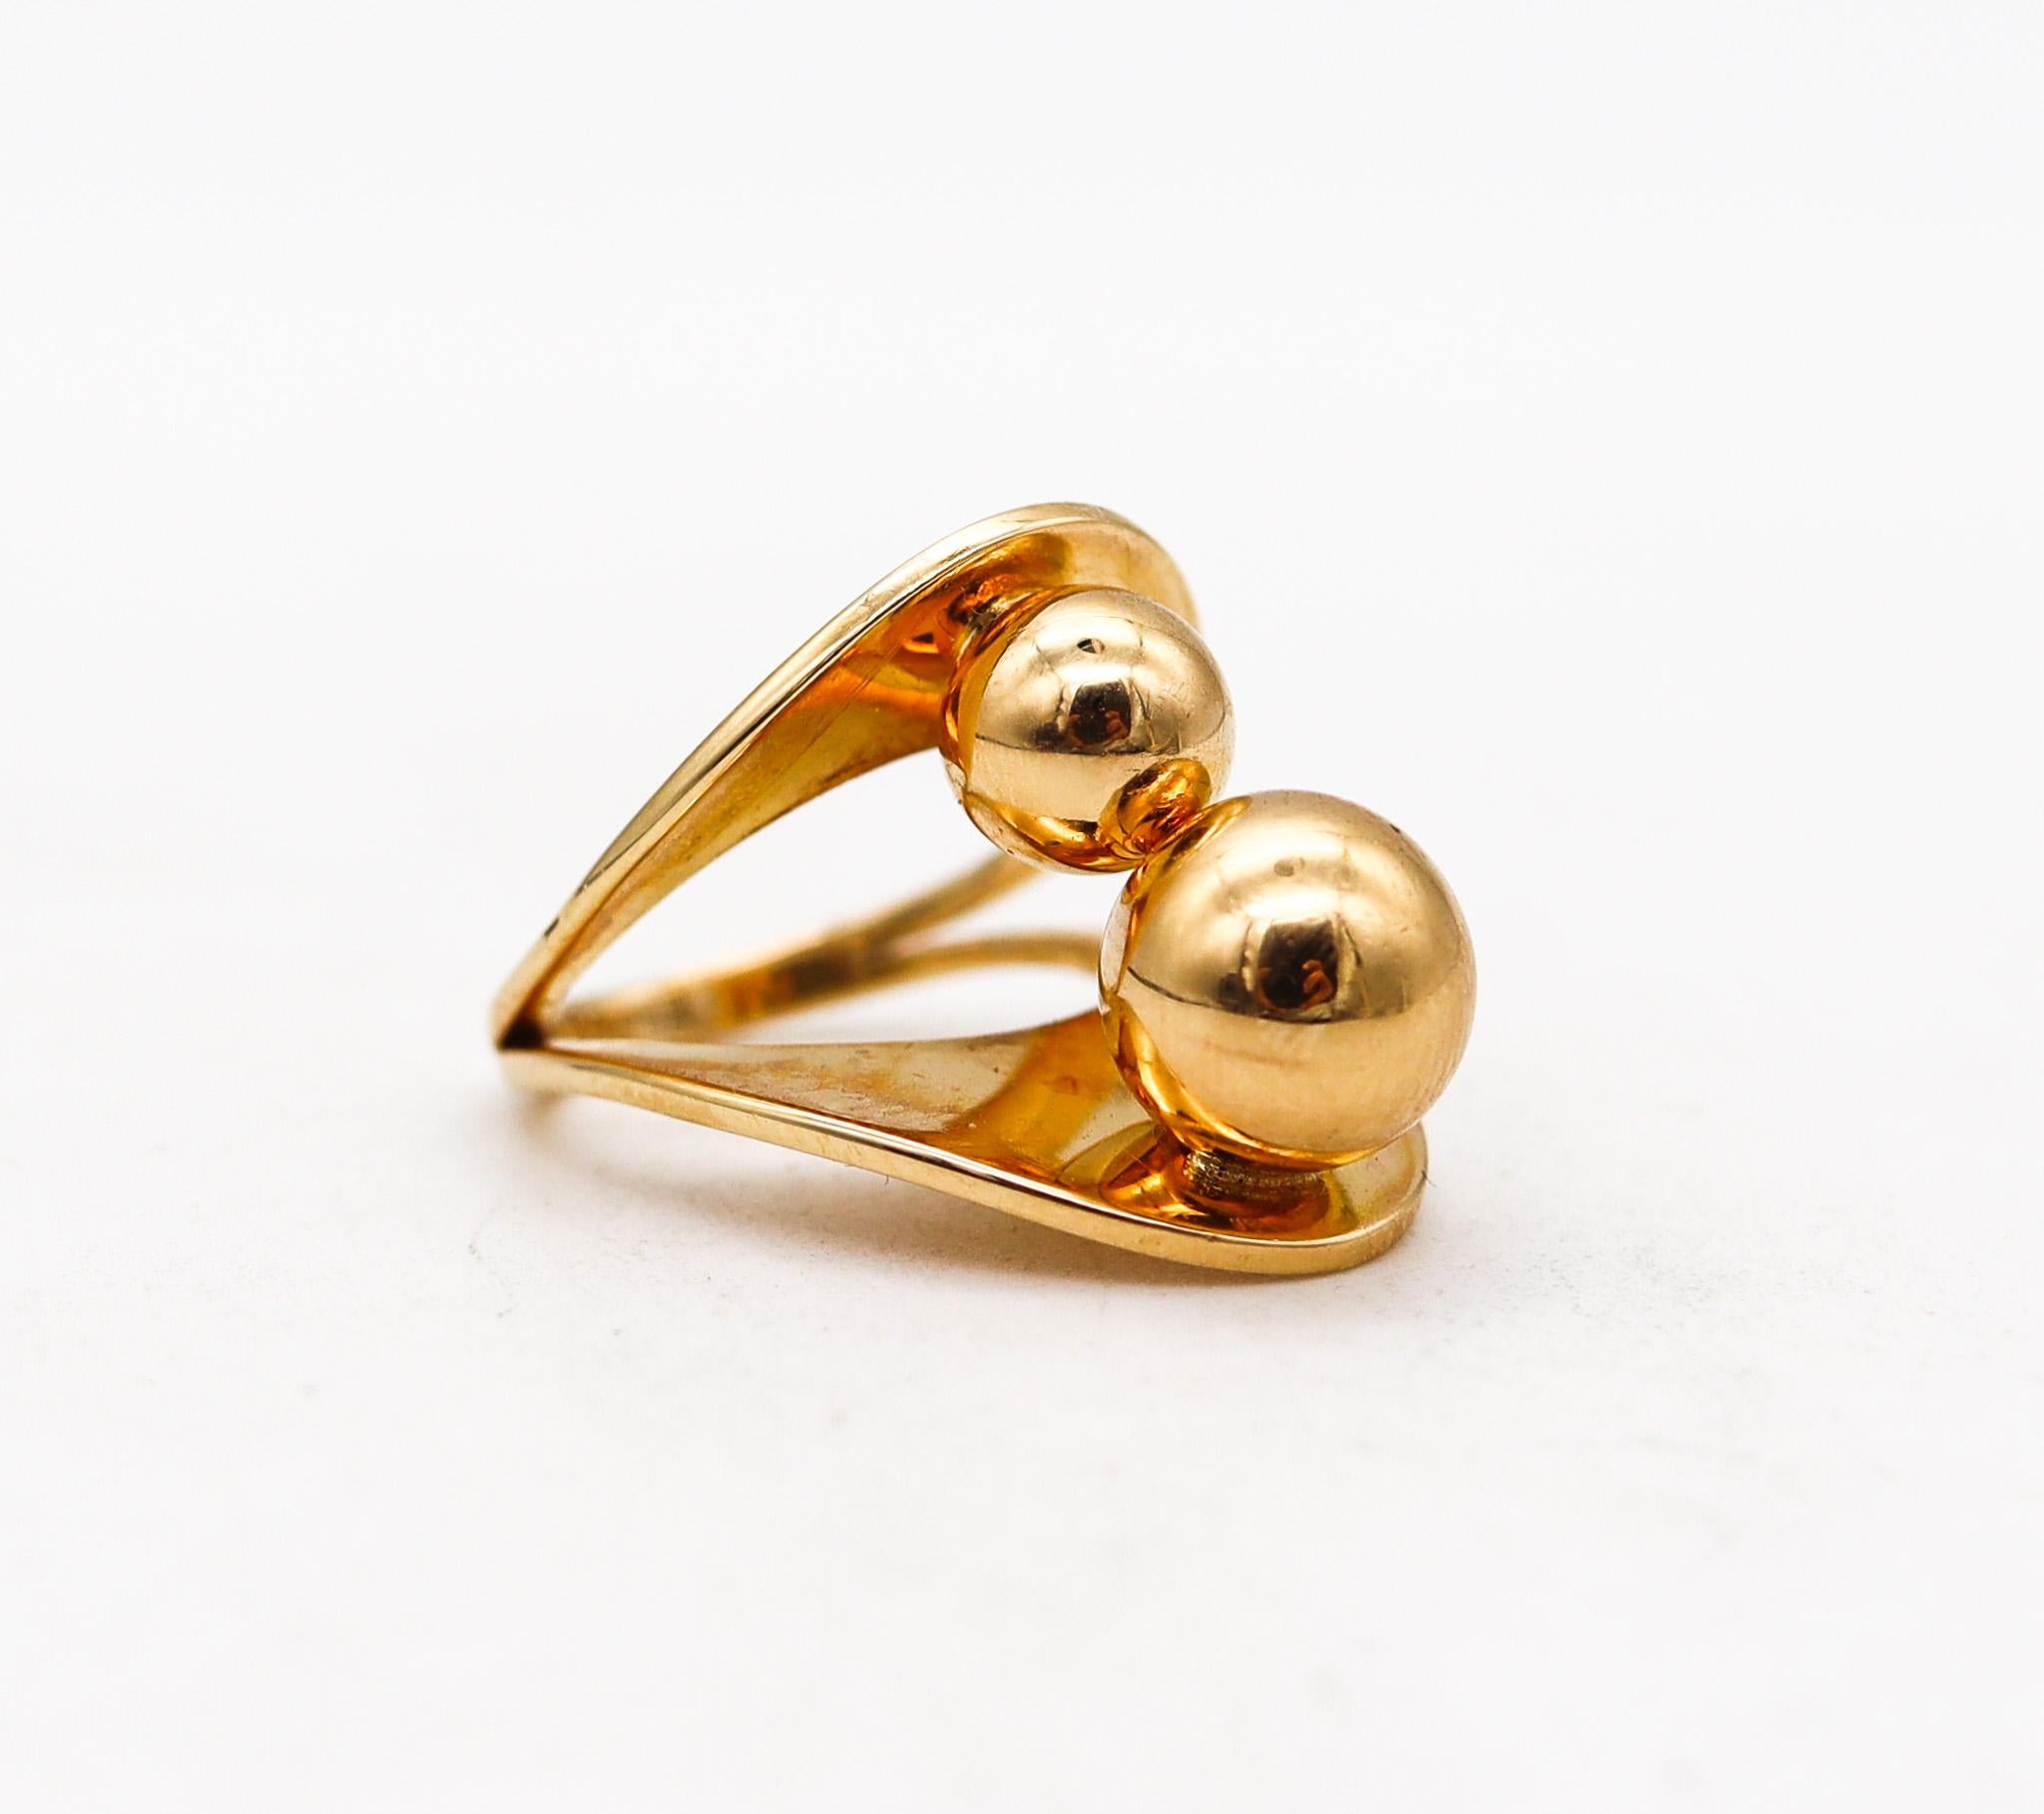 Sculptural ring designed by Dinh Van for Cartier.

A stunning very rare ring, created back in the late 1960's by the artist Jean Dinh Van for the house of Cartier. This sculptural piece has been crafted in solid yellow gold of 18 karats with high